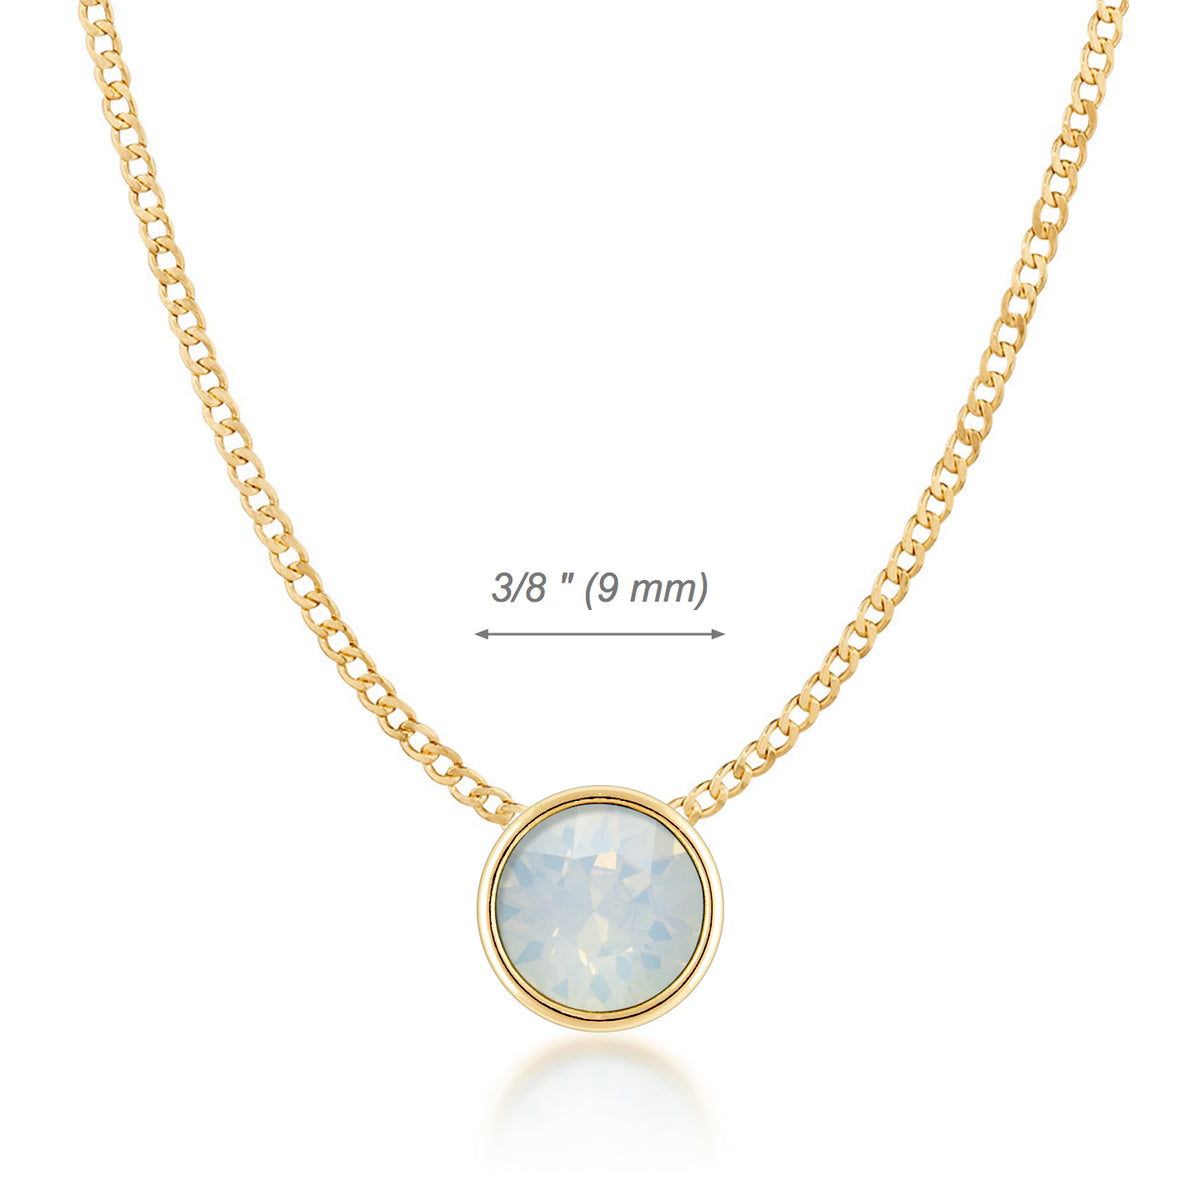 Harley Small Pendant Necklace with Ivory White Round Opals from Swarovski Gold Plated - Ed Heart